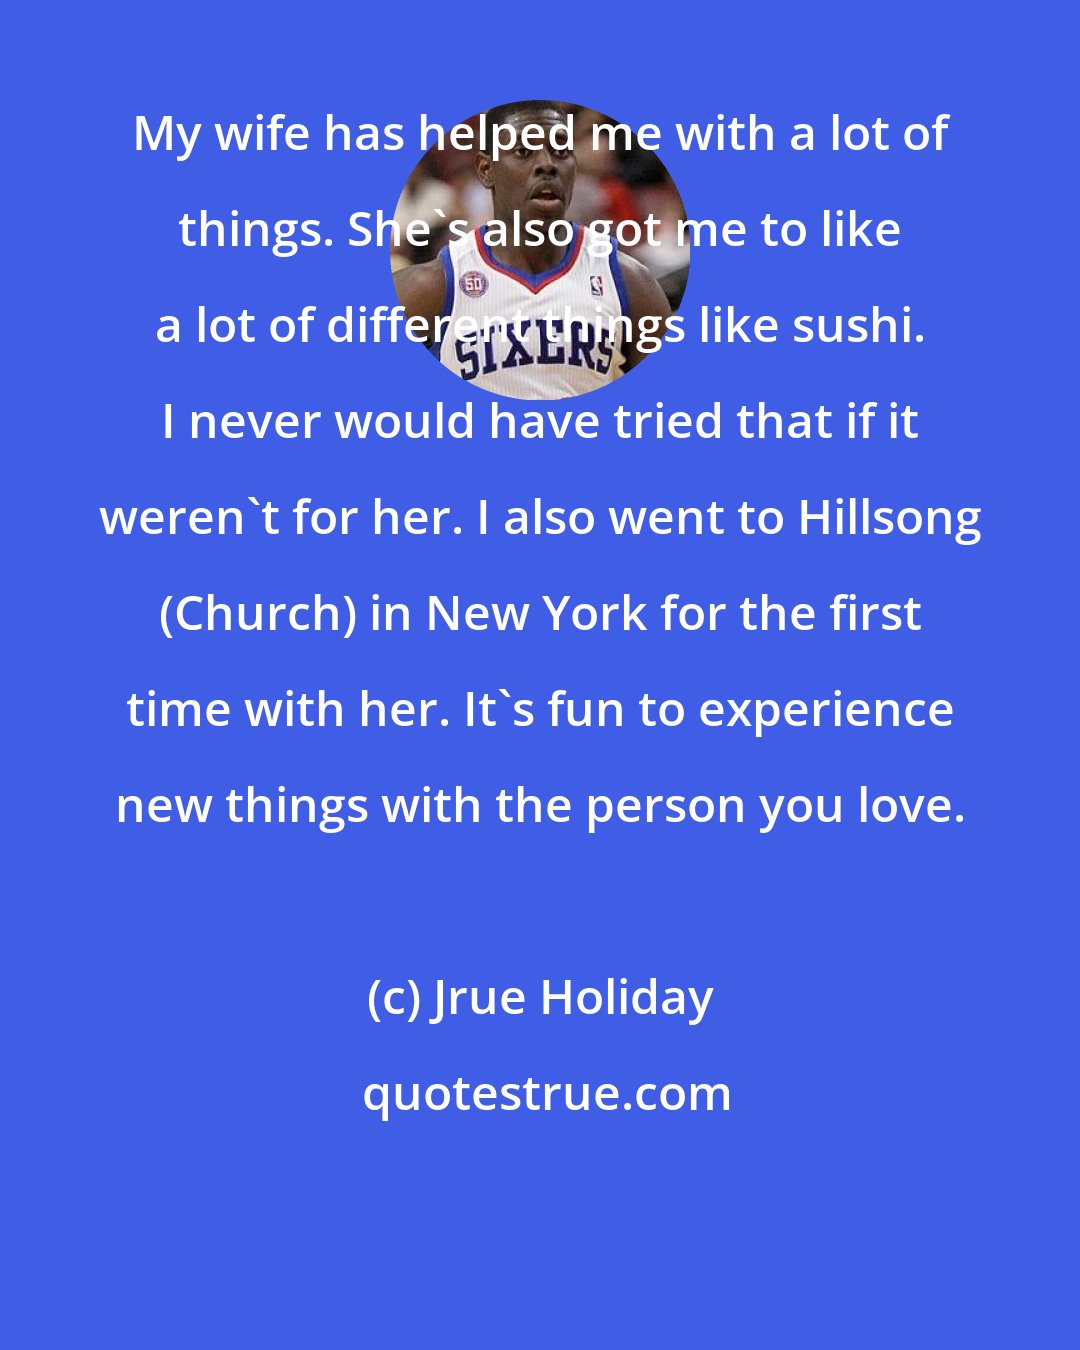 Jrue Holiday: My wife has helped me with a lot of things. She's also got me to like a lot of different things like sushi. I never would have tried that if it weren't for her. I also went to Hillsong (Church) in New York for the first time with her. It's fun to experience new things with the person you love.